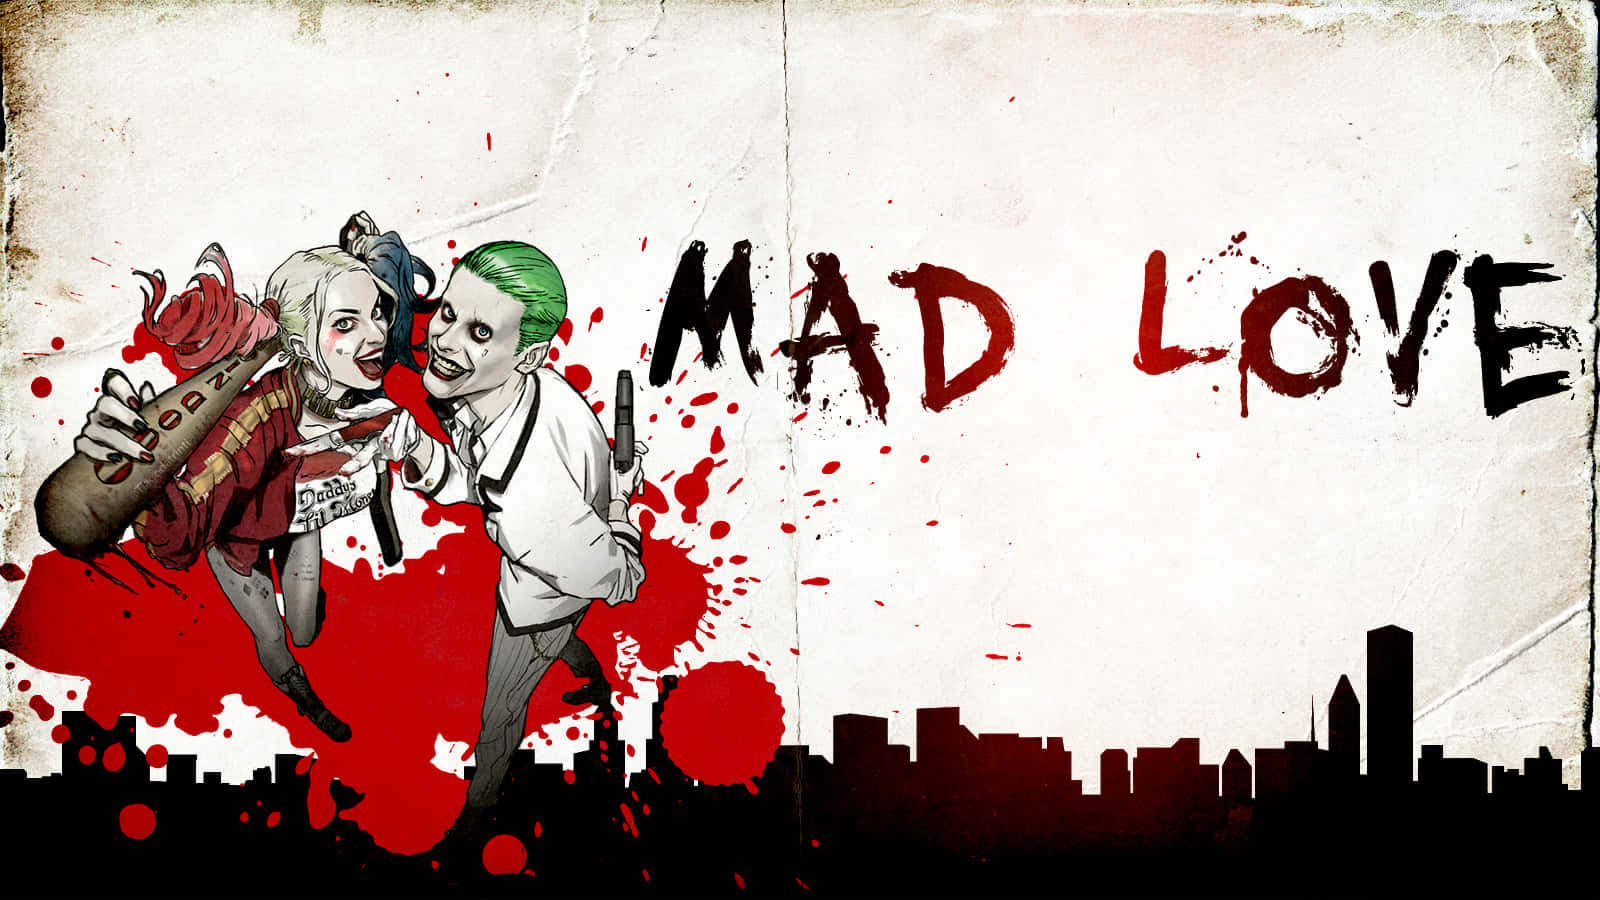 Crazed Love - The Joker And Harley Quinn From Suicide Squad Wallpaper